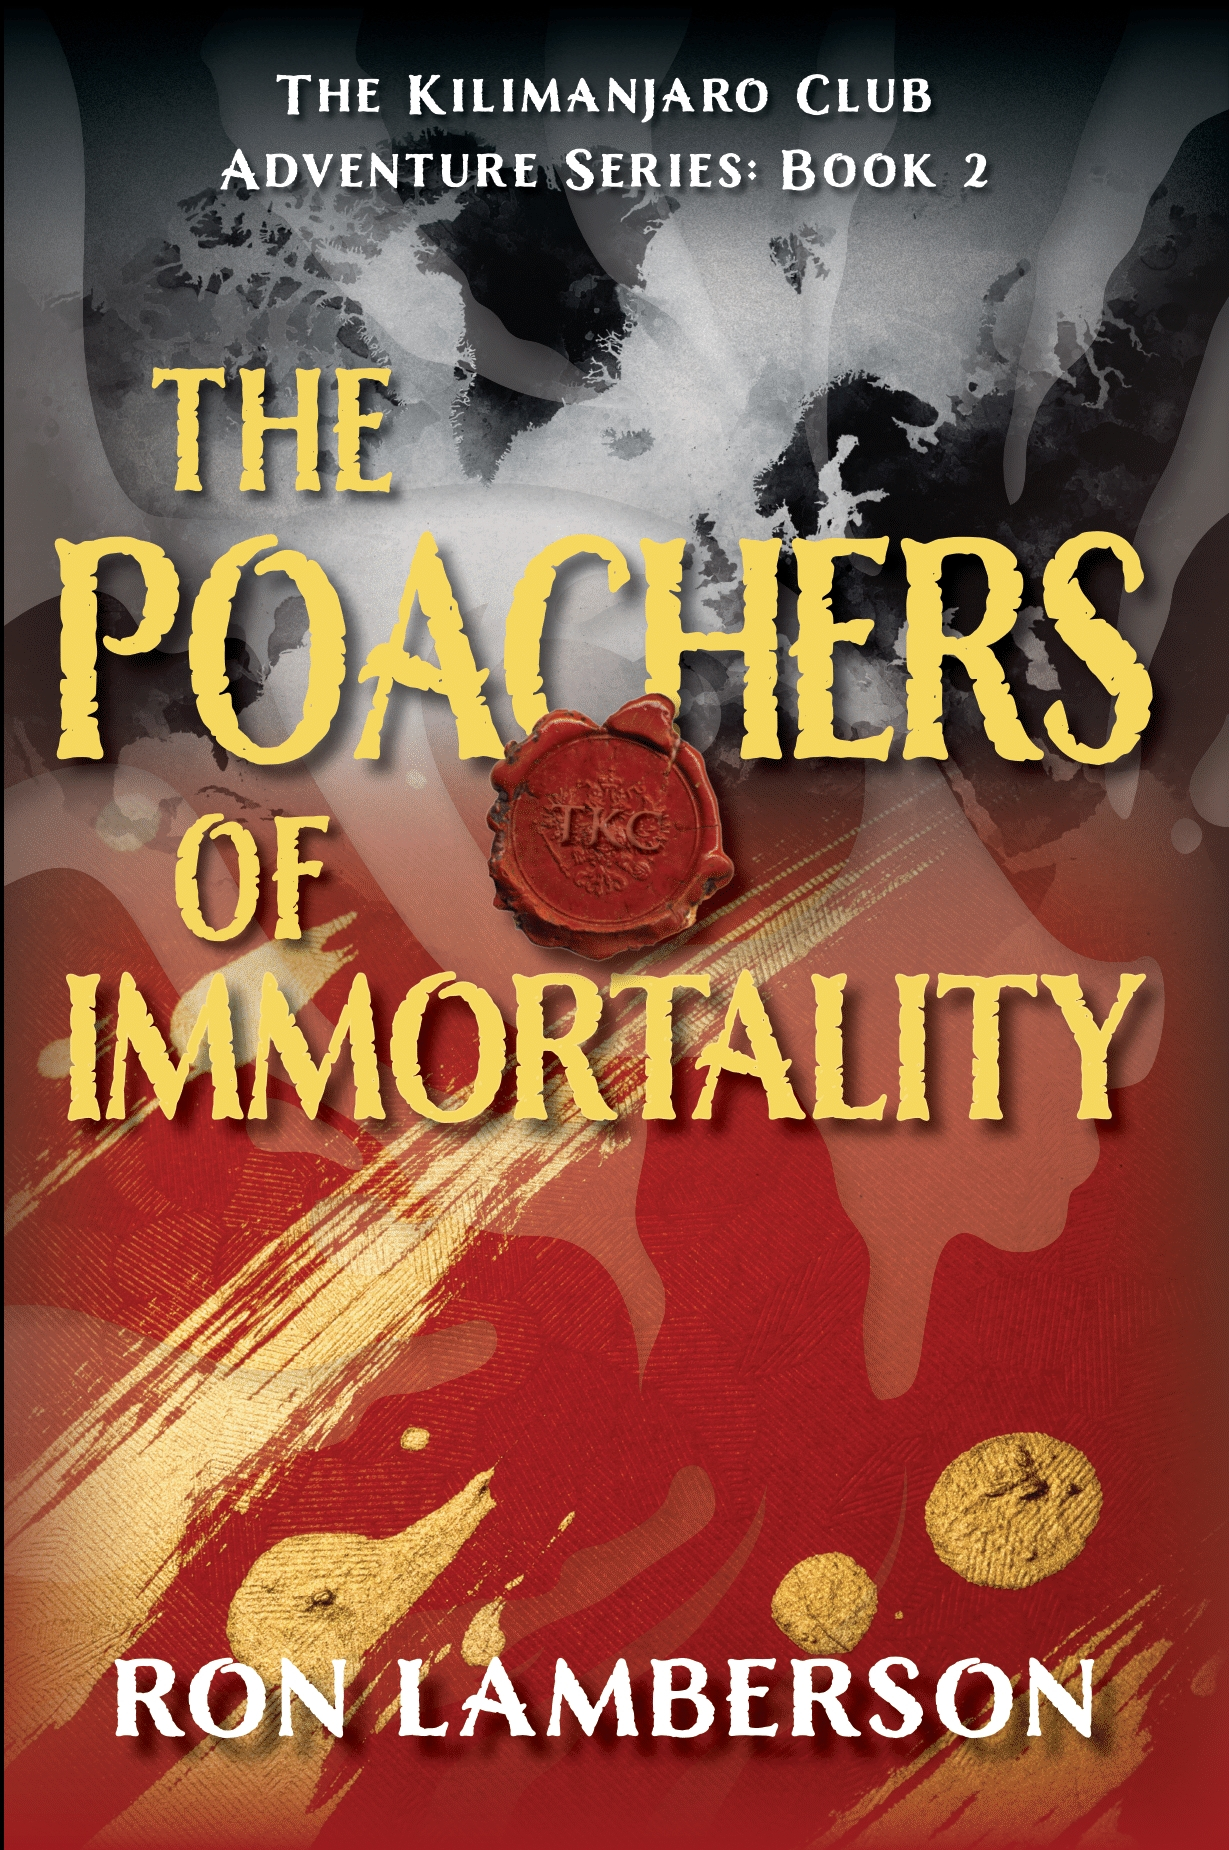 https://www.forewordreviews.com/books/covers/the-poachers-of-immortality.jpg